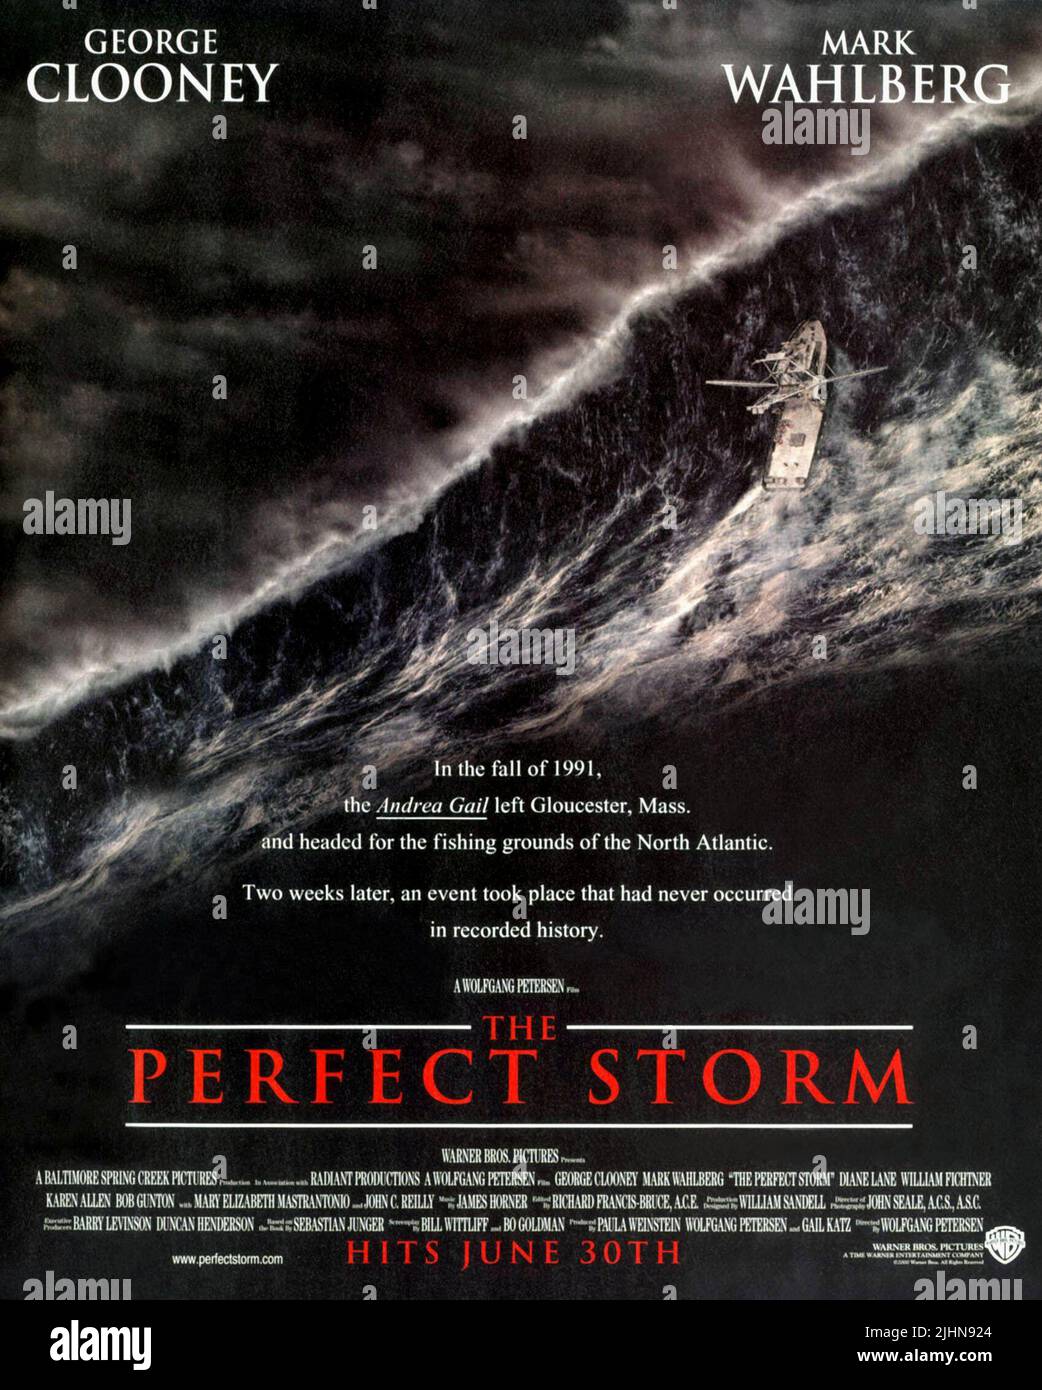 THE PERFECT STORM FILM POSTER, THE PERFECT STORM, 2000 Stock Photo